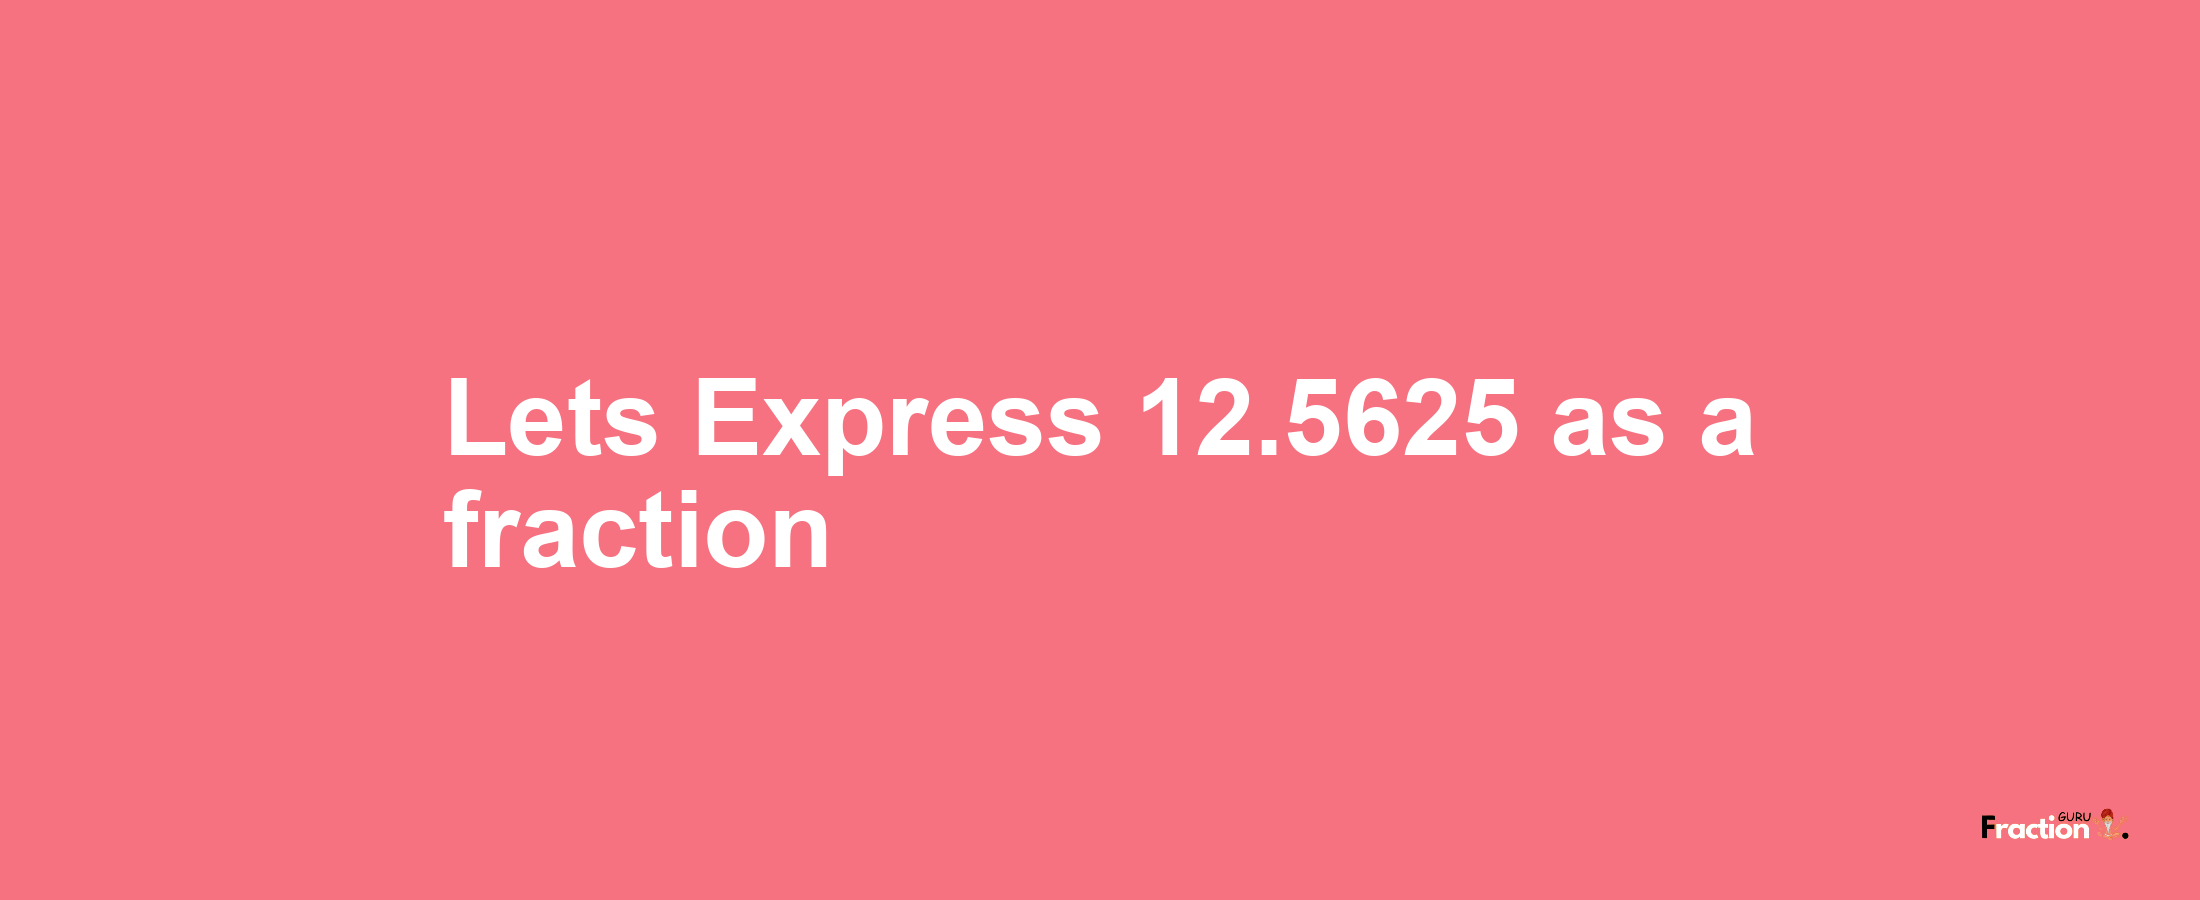 Lets Express 12.5625 as afraction